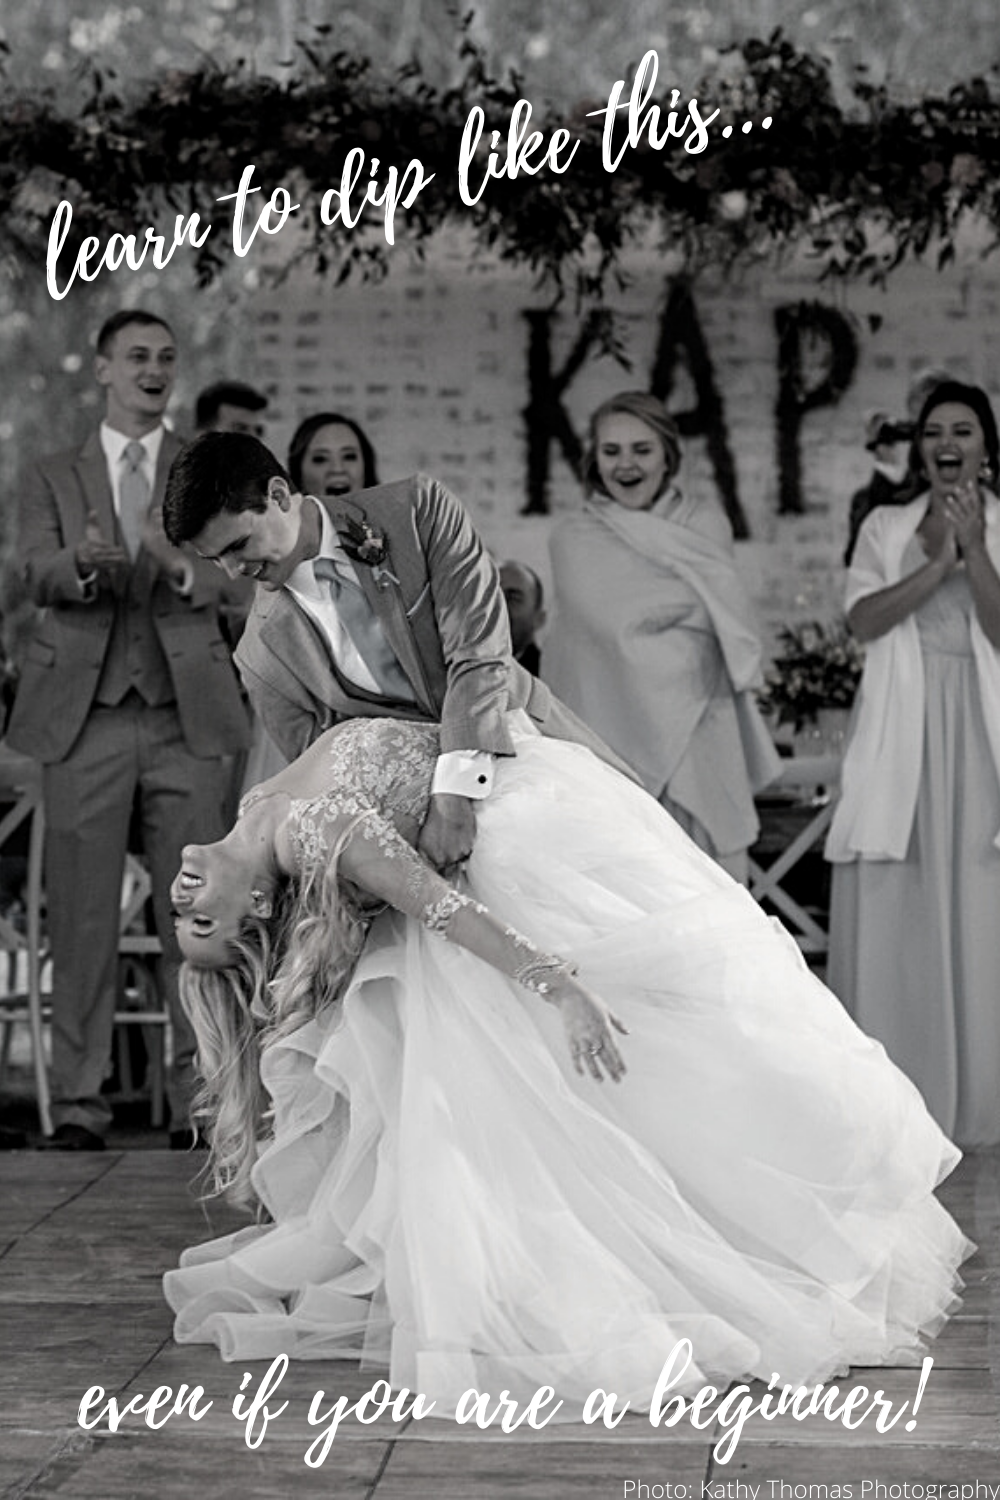 THIS WILL BE AN EVERLASTING LOVE WEDDING FIRST DANCE CHOREOGRAPHY FOR BEGINNERS - kathy thomas photography